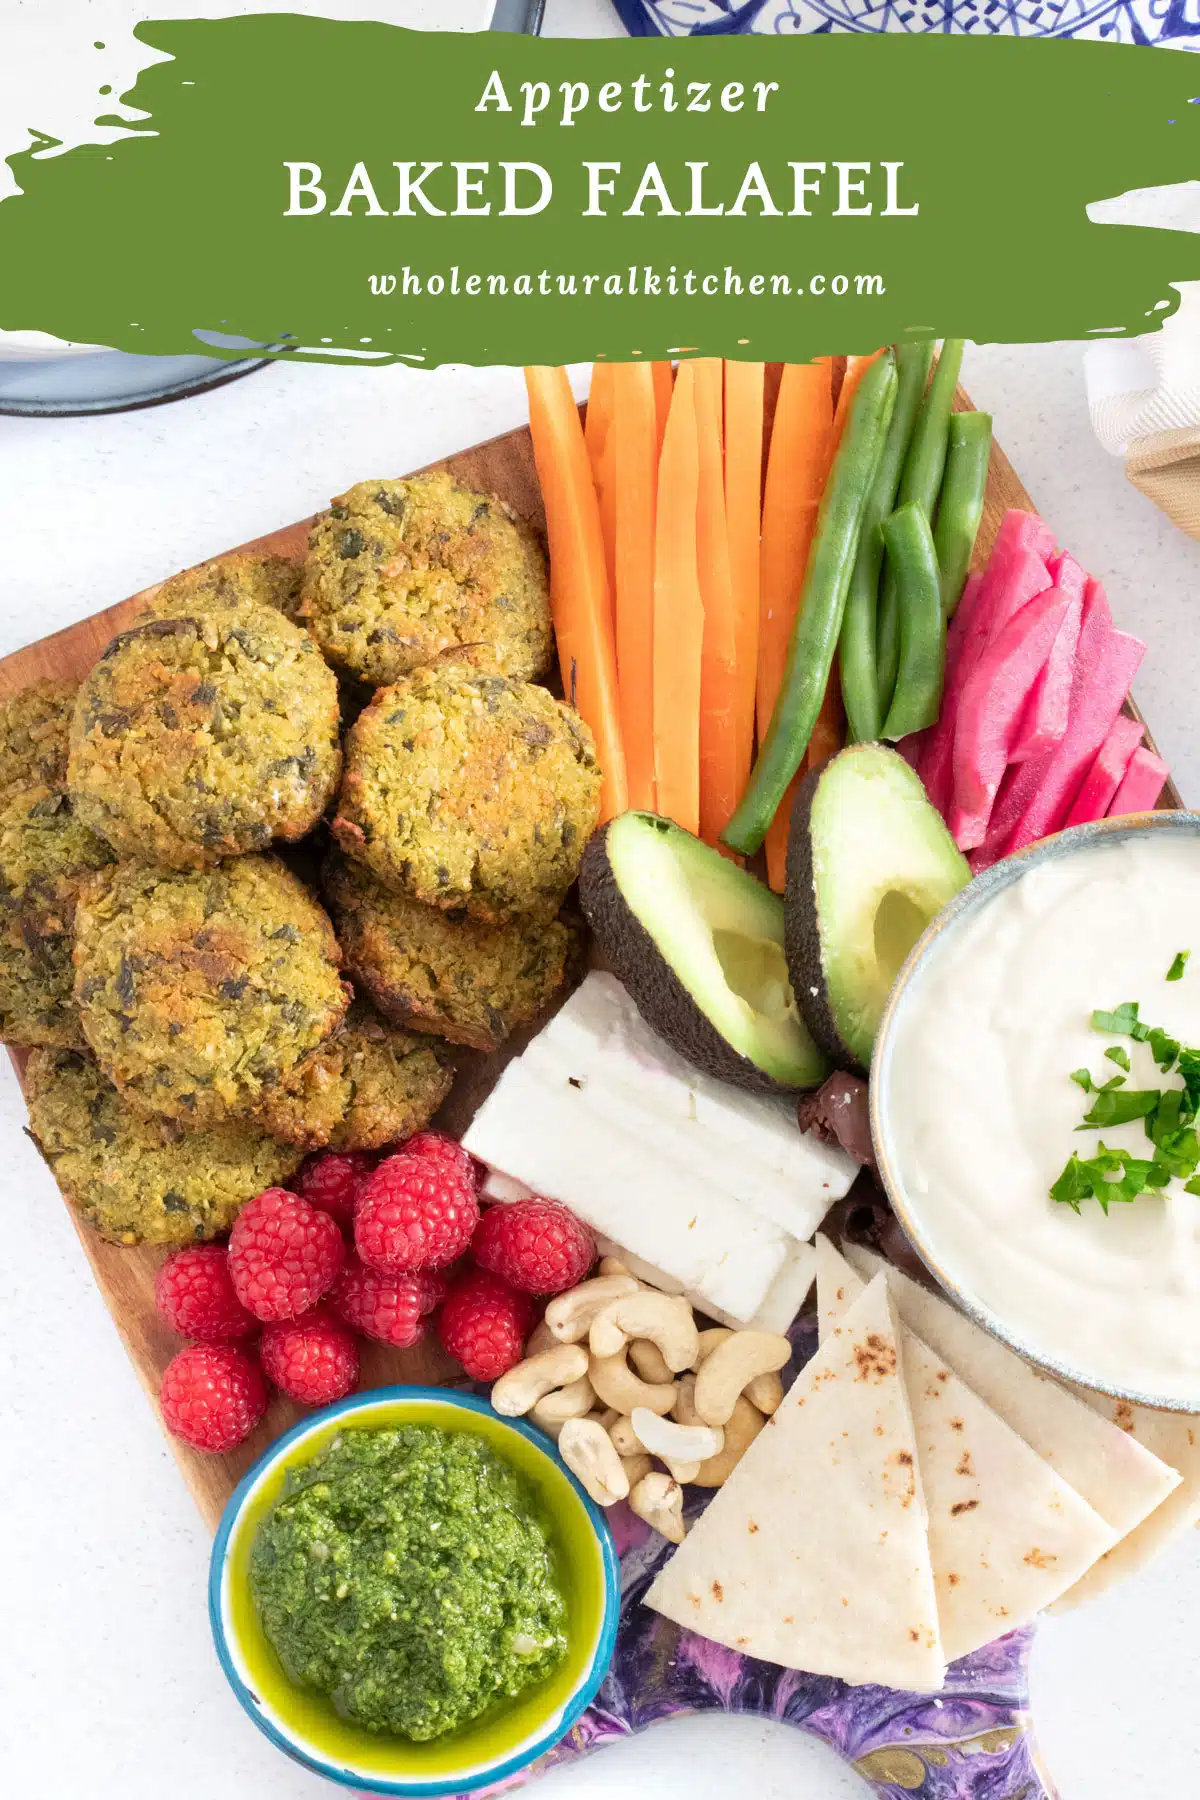 A pinterest poster image showing the name of the recipe up the top along with the website and course. An image of falafel as part of a colourful mezze board is down the bottom.